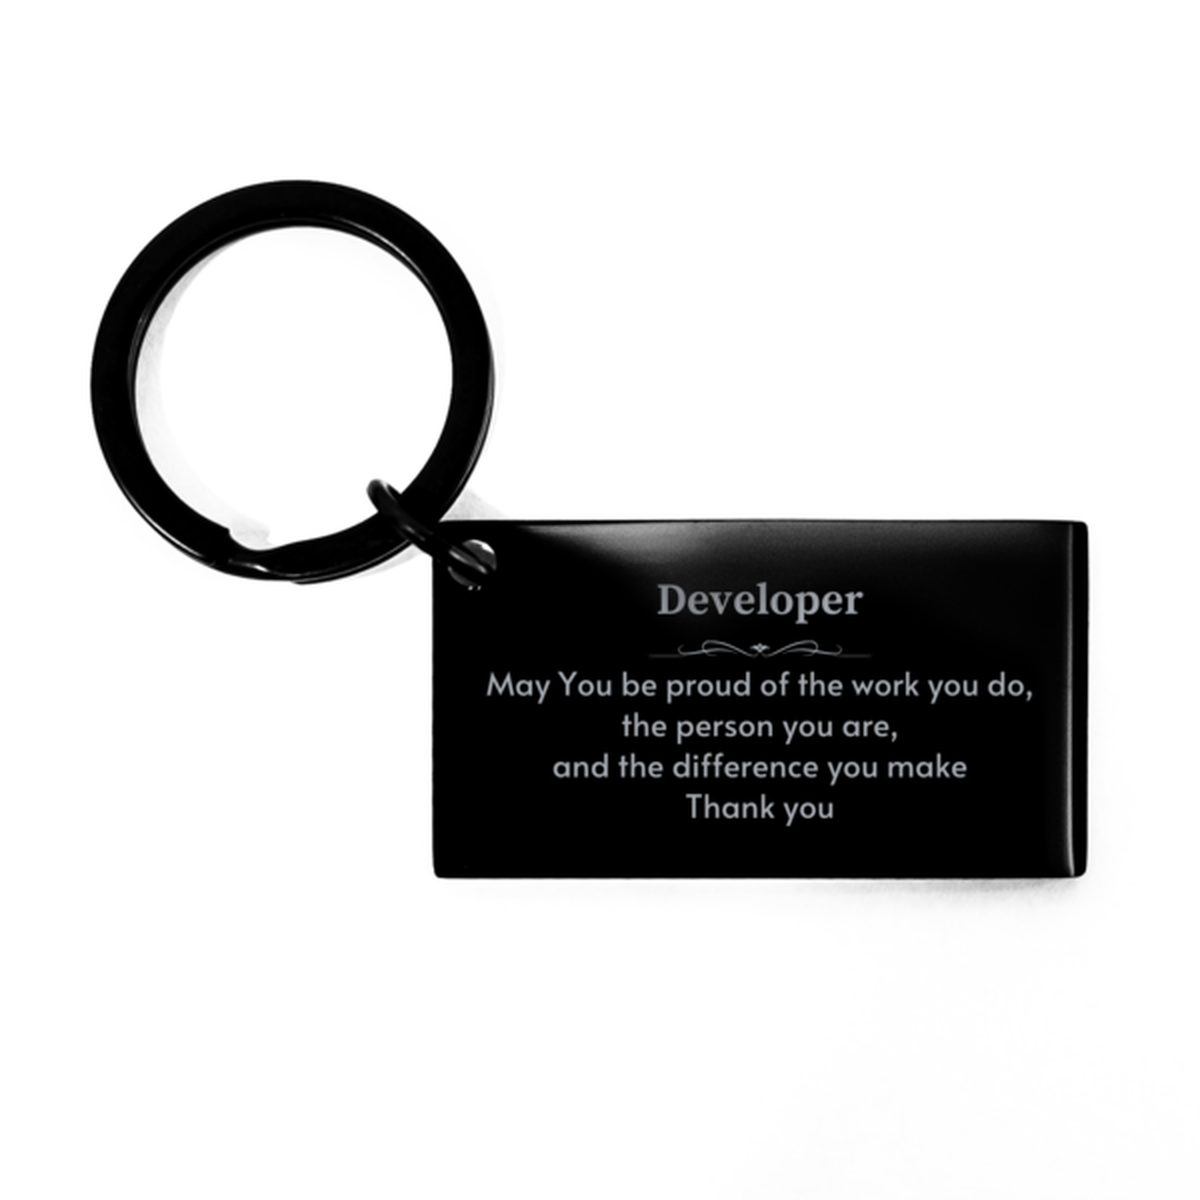 Heartwarming Keychain Retirement Coworkers Gifts for Developer, Guide May You be proud of the work you do, the person you are Gifts for Boss Men Women Friends